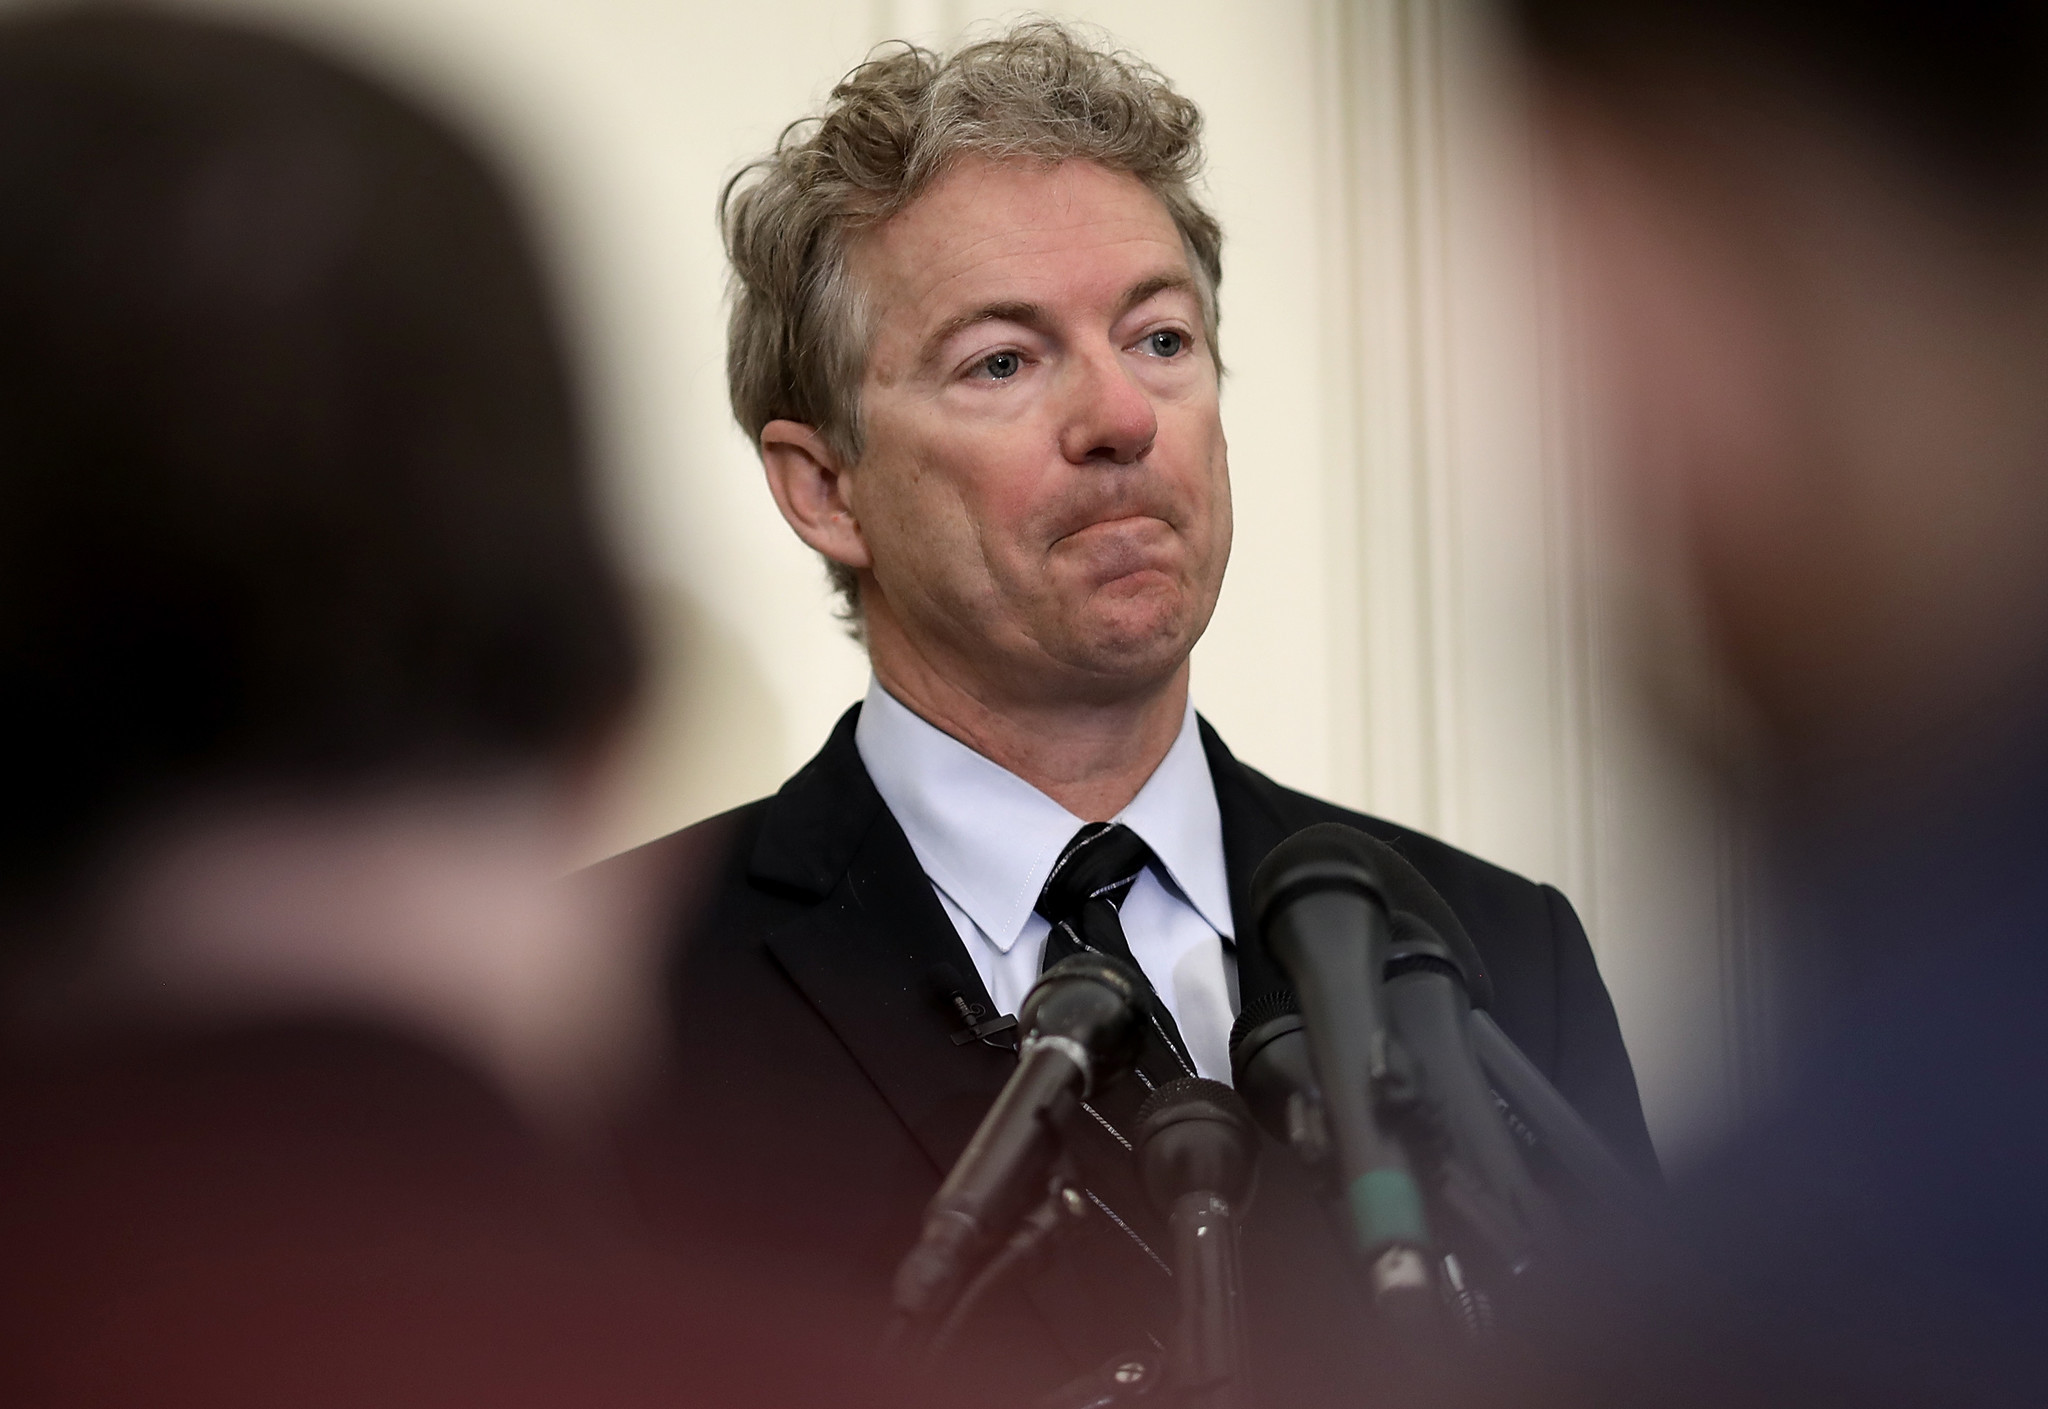 Sen. Rand Paul opposes confirming Trump's secretary of state and CIA nominees ...2048 x 1409